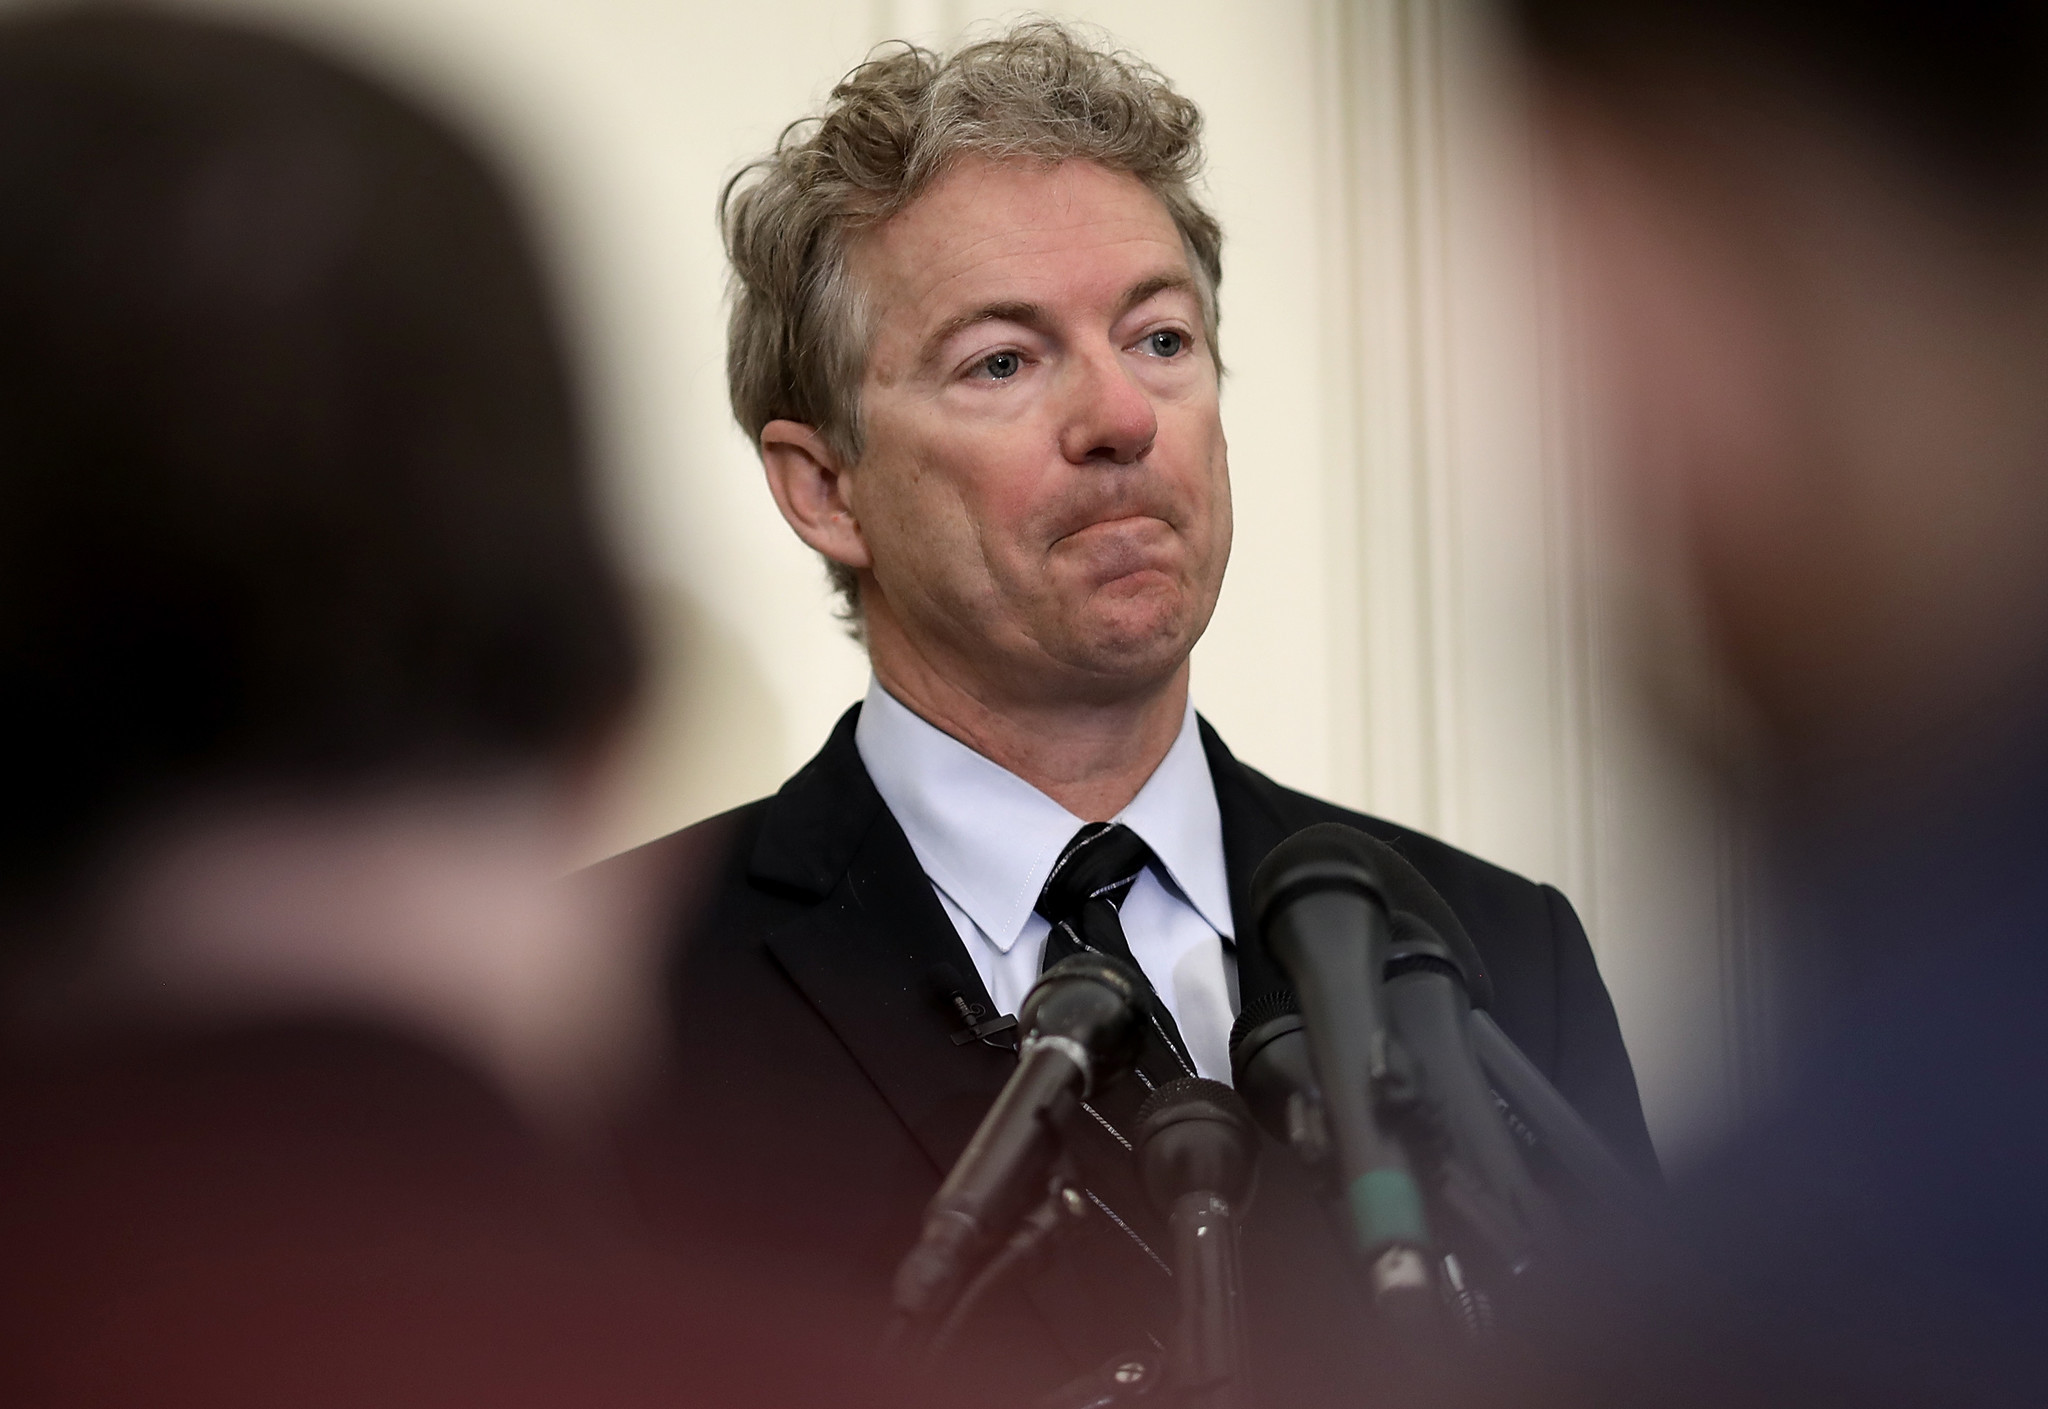 Sen. Rand Paul opposes confirming Trump's secretary of state and CIA nominees ...2048 x 1409